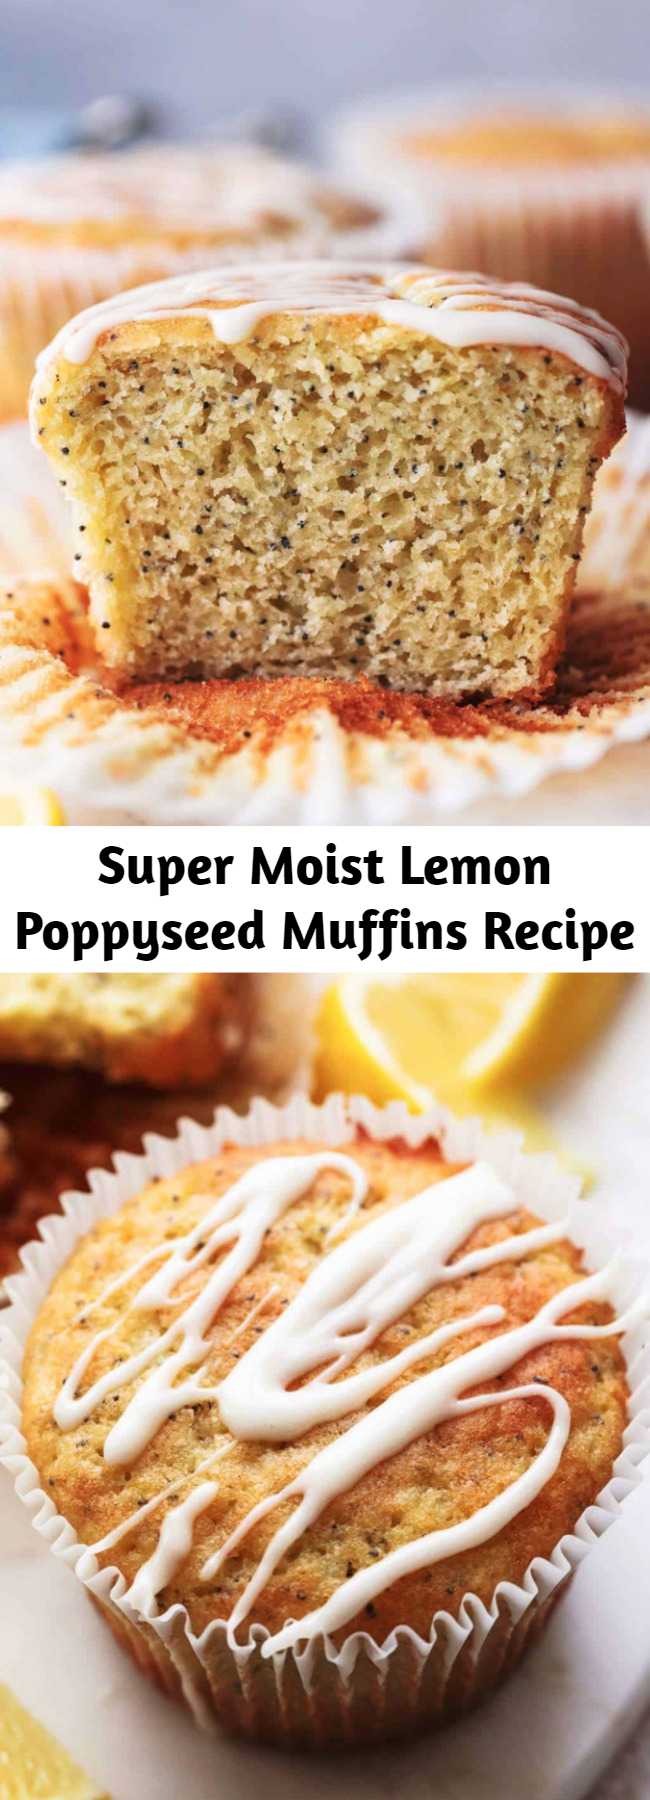 Super Moist Lemon Poppyseed Muffins Recipe - Incredibly tasty, luscious lemon poppyseed muffins made super-moist with Greek yogurt and topped with sweet and tangy cream cheese lemon glaze!